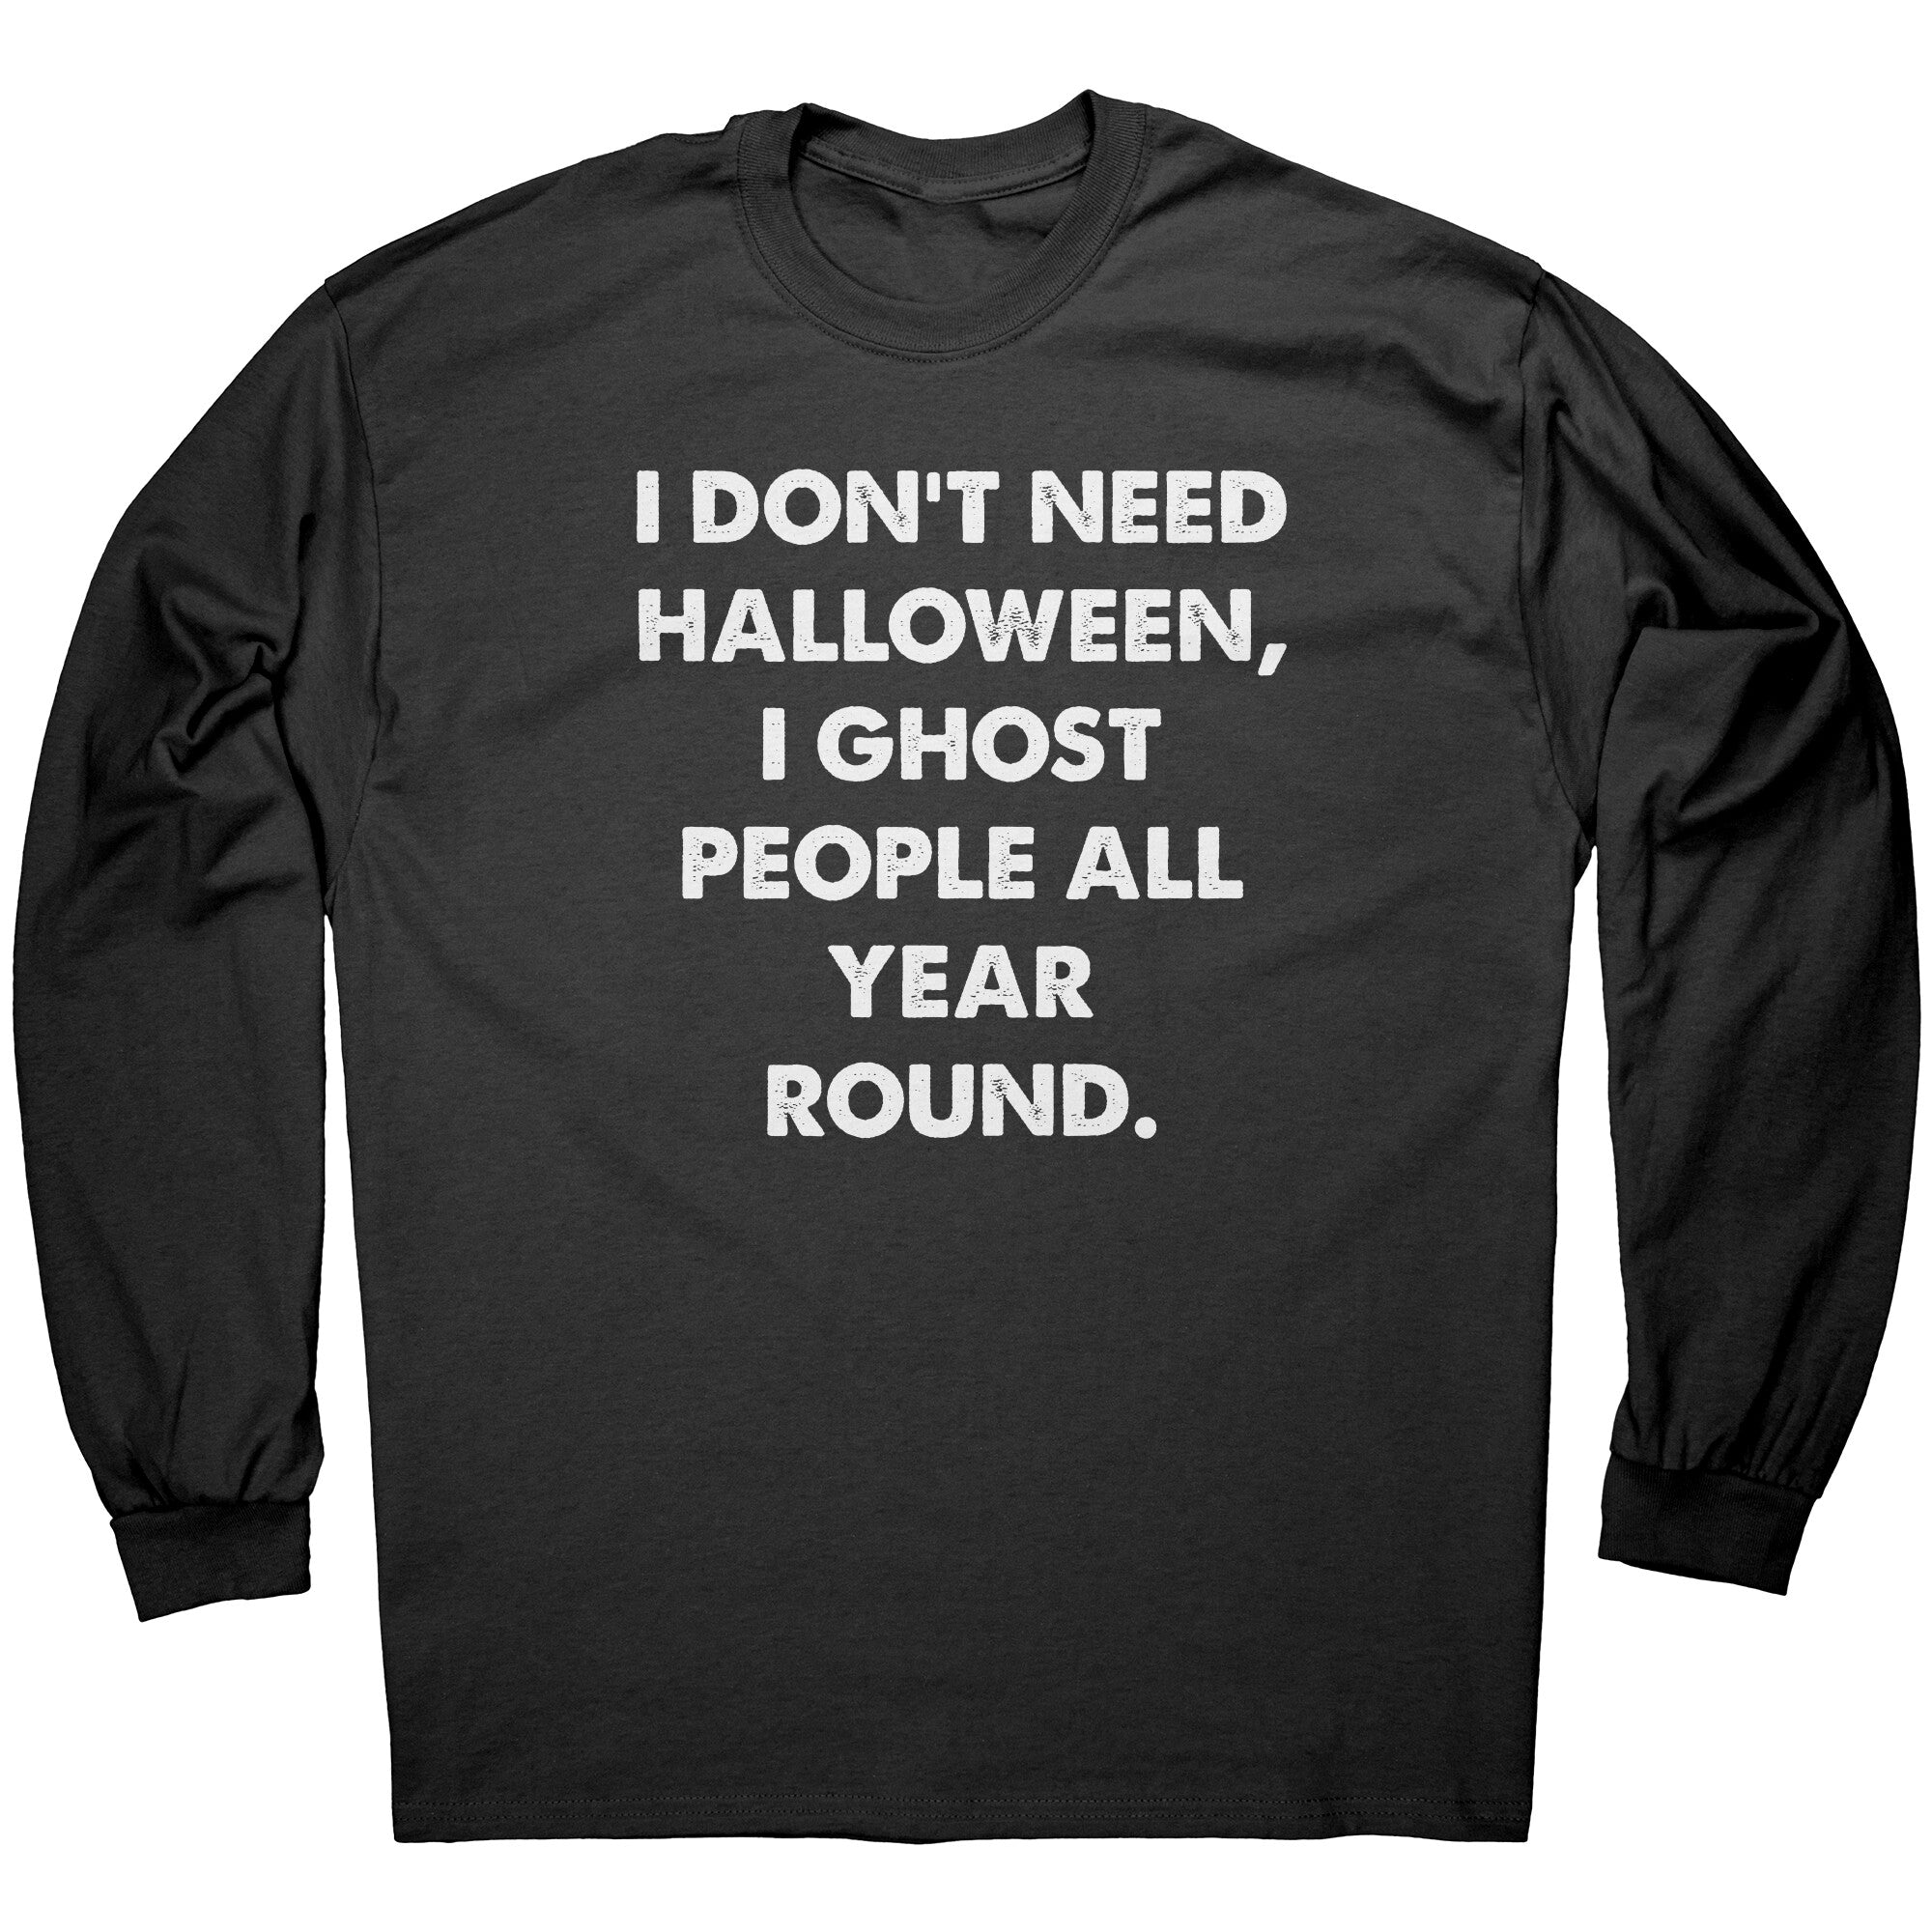 I Don't Need Halloween, I Ghost People All Year Round. -Apparel | Drunk America 